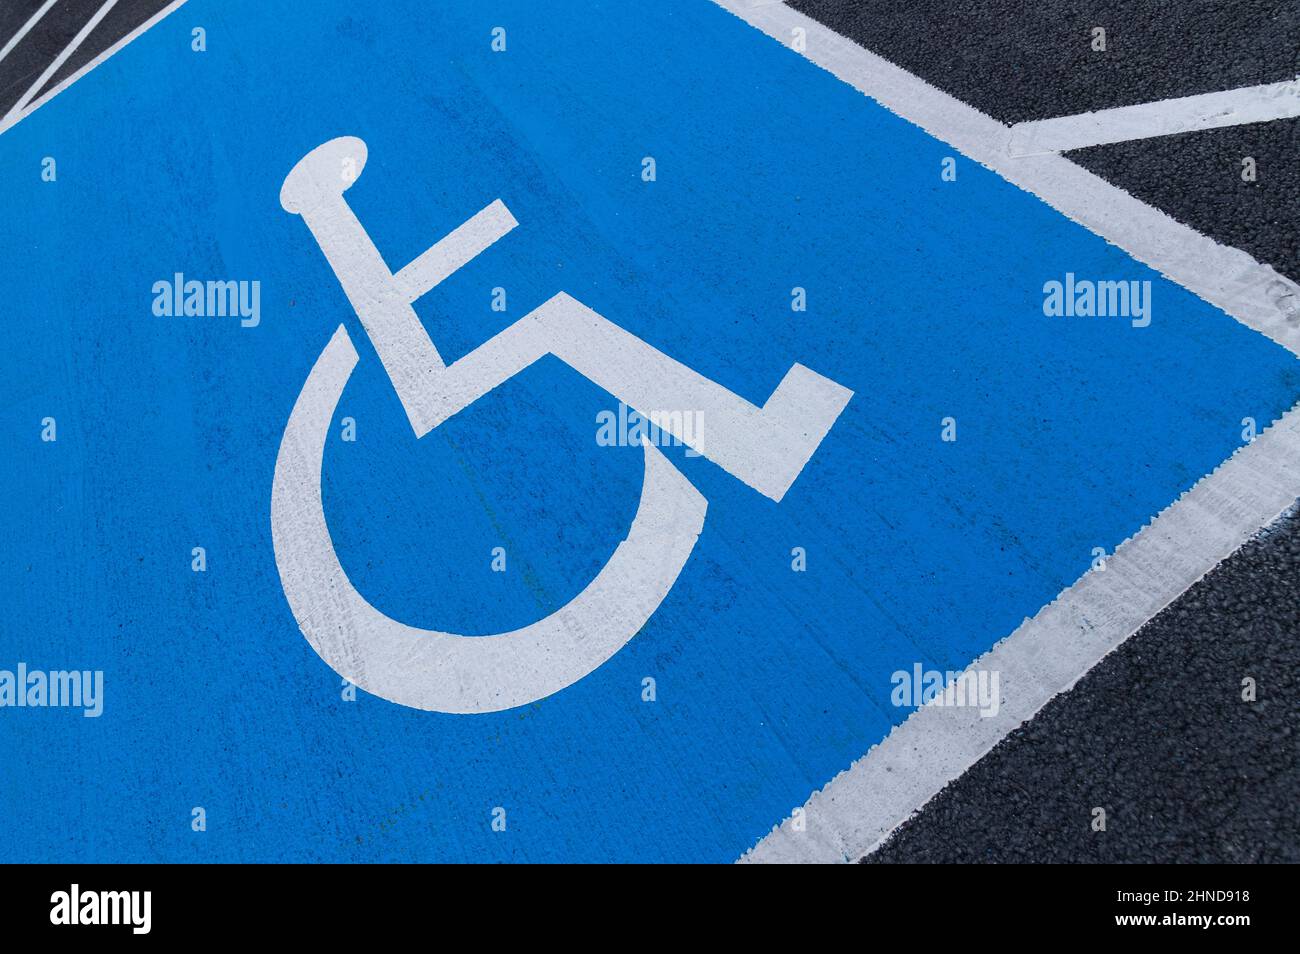 Ireland, County Offaly, Tullamore, Disabled car parking space. Stock Photo